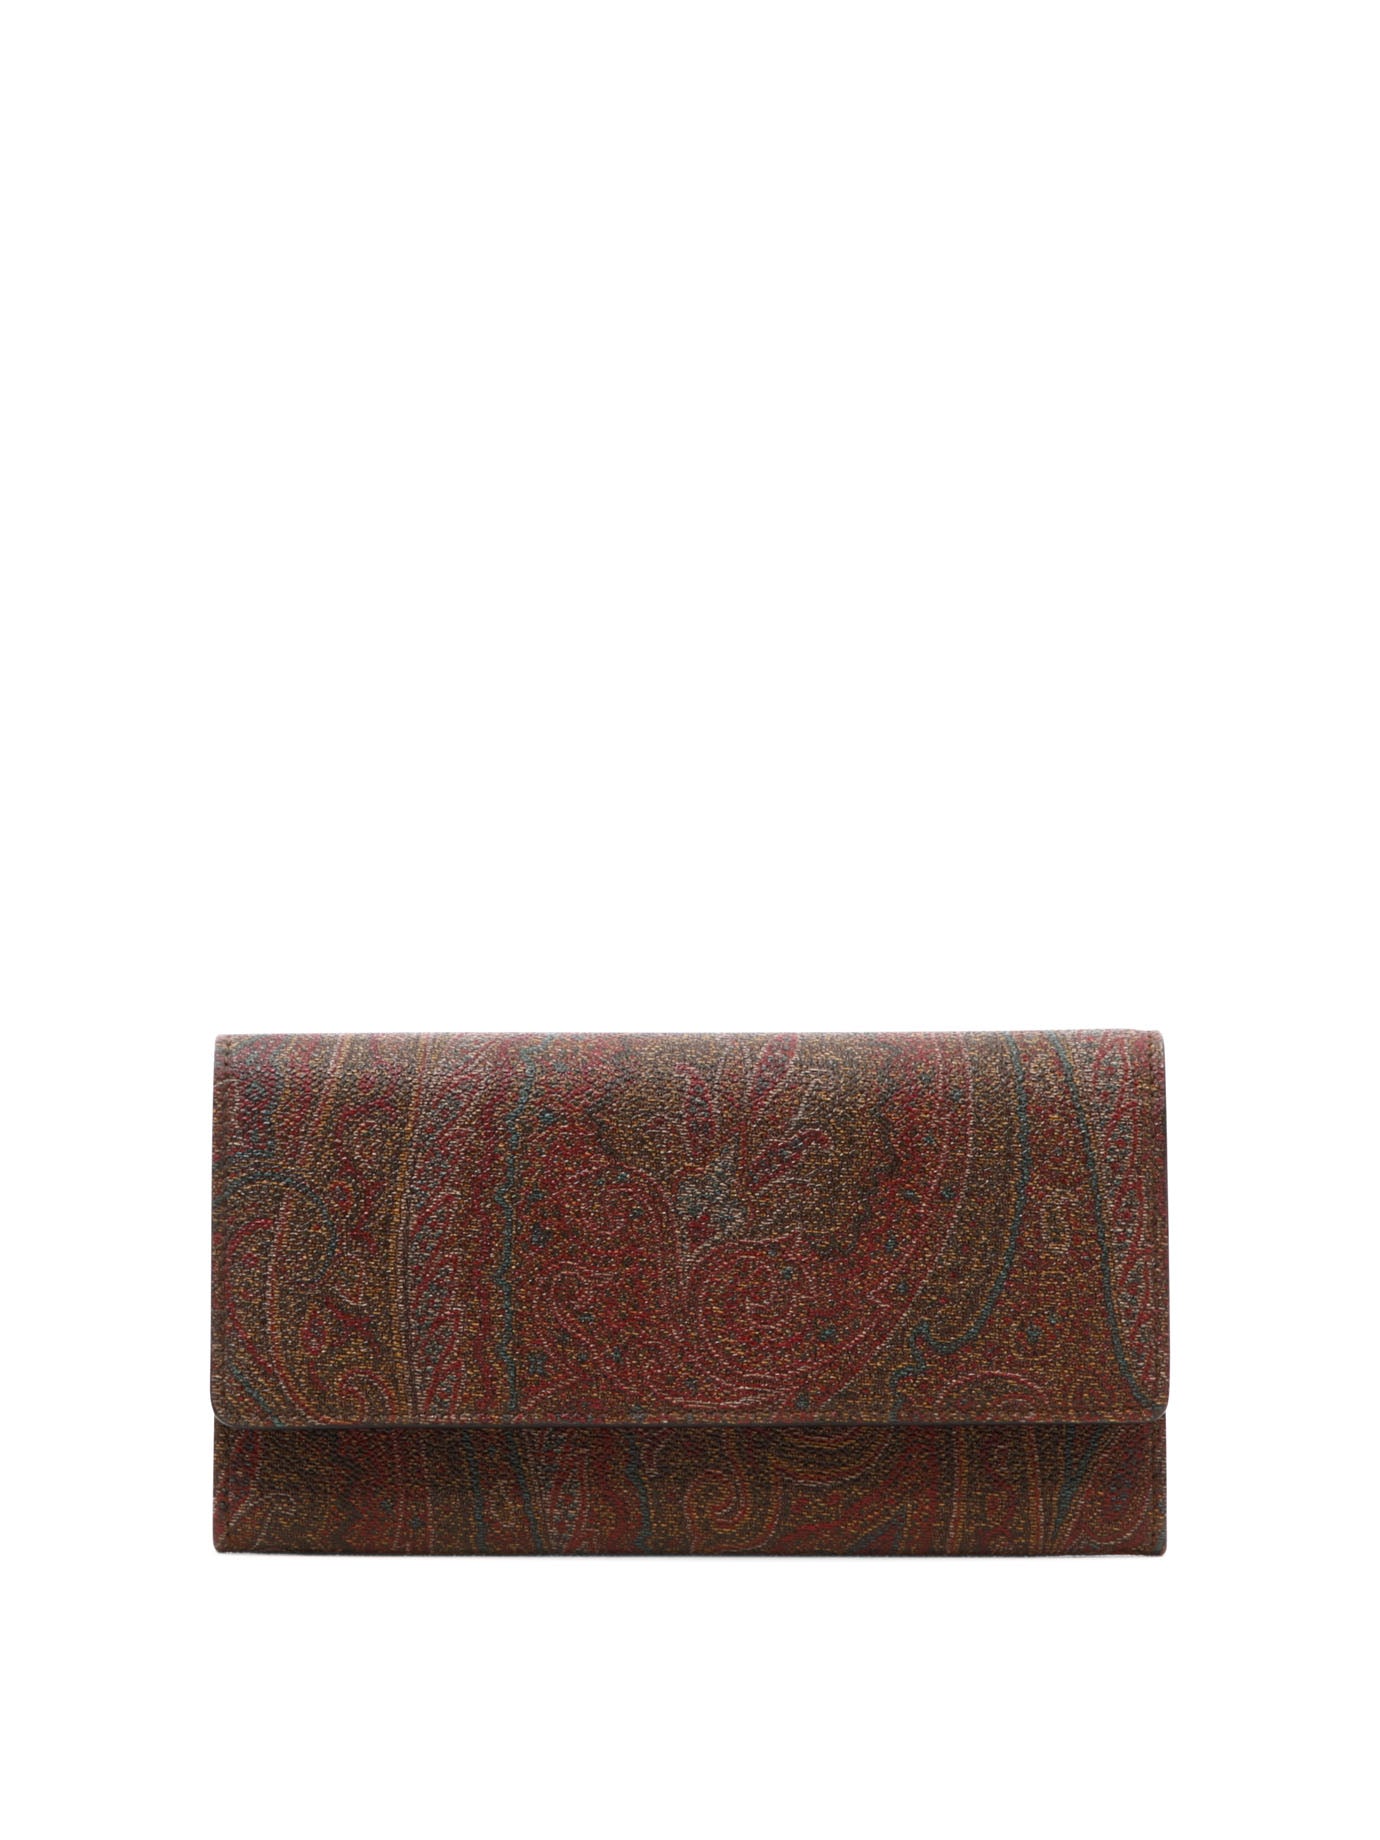 Etro Paisley Wallets & Card Holders In Burgundy